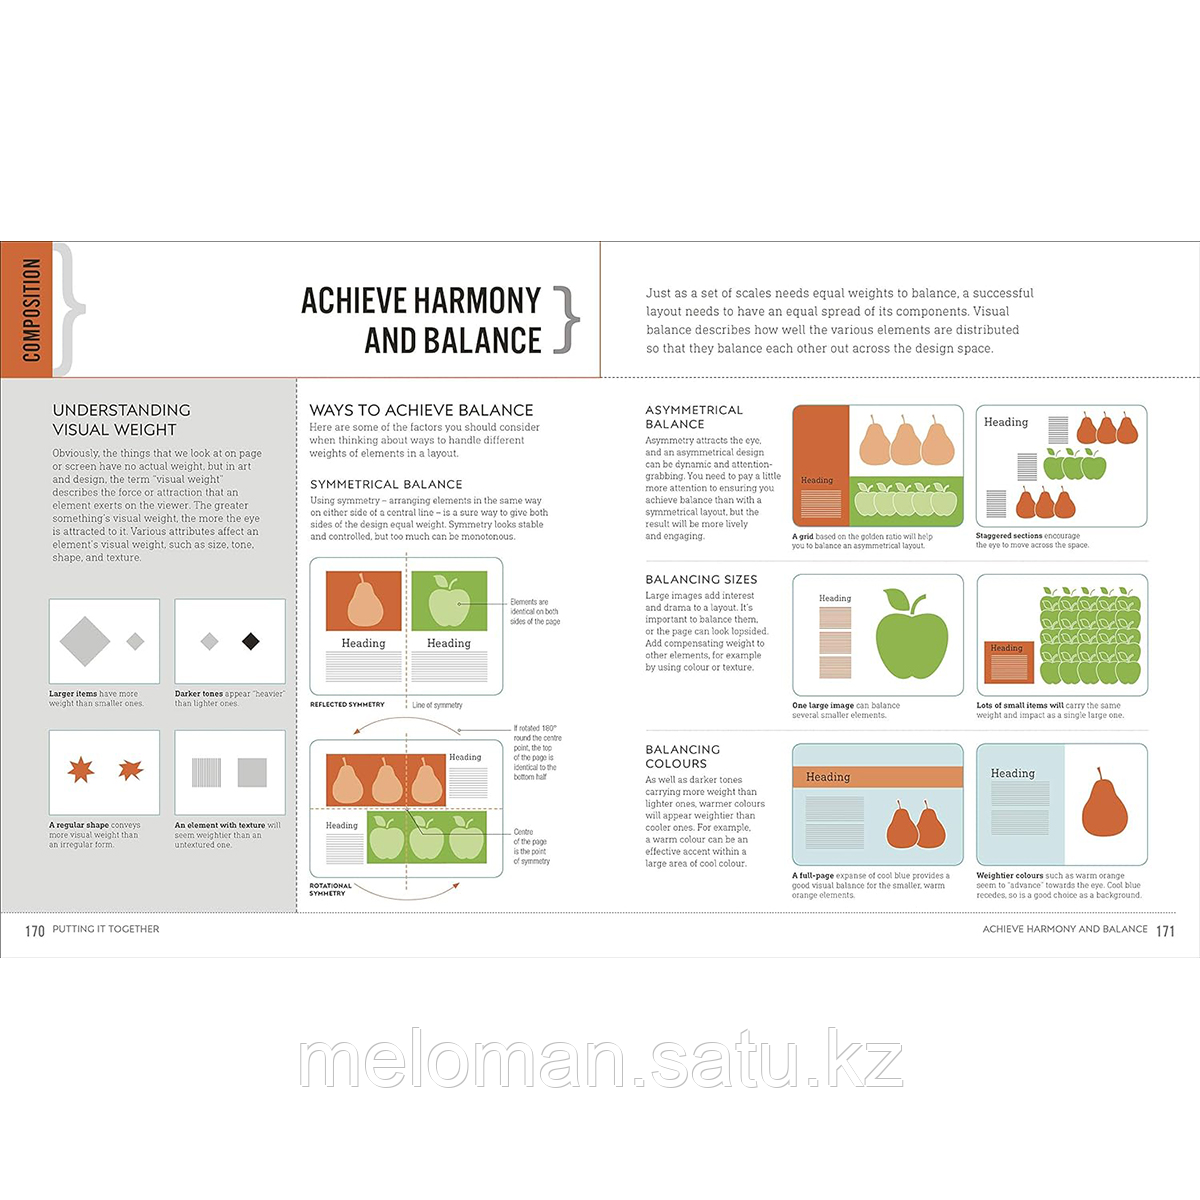 Graphic Design For Everyone. Understand the Building Blocks so You can Do It Yourself - фото 6 - id-p116453650